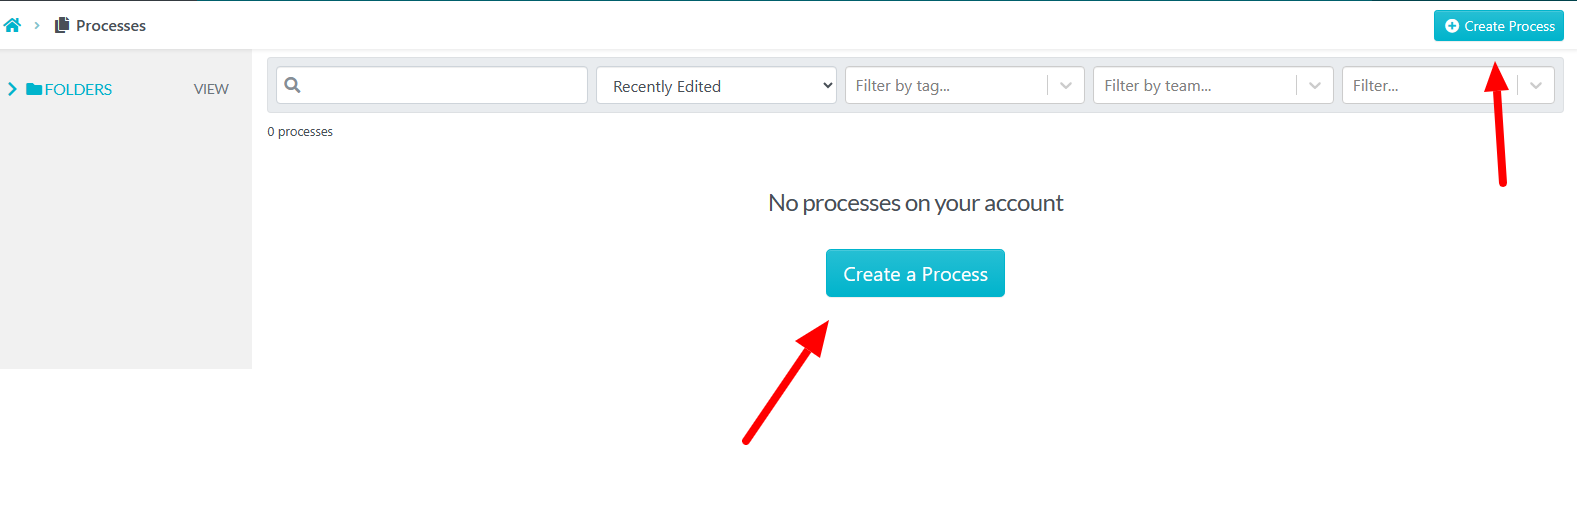 Click on the "Create Process" button